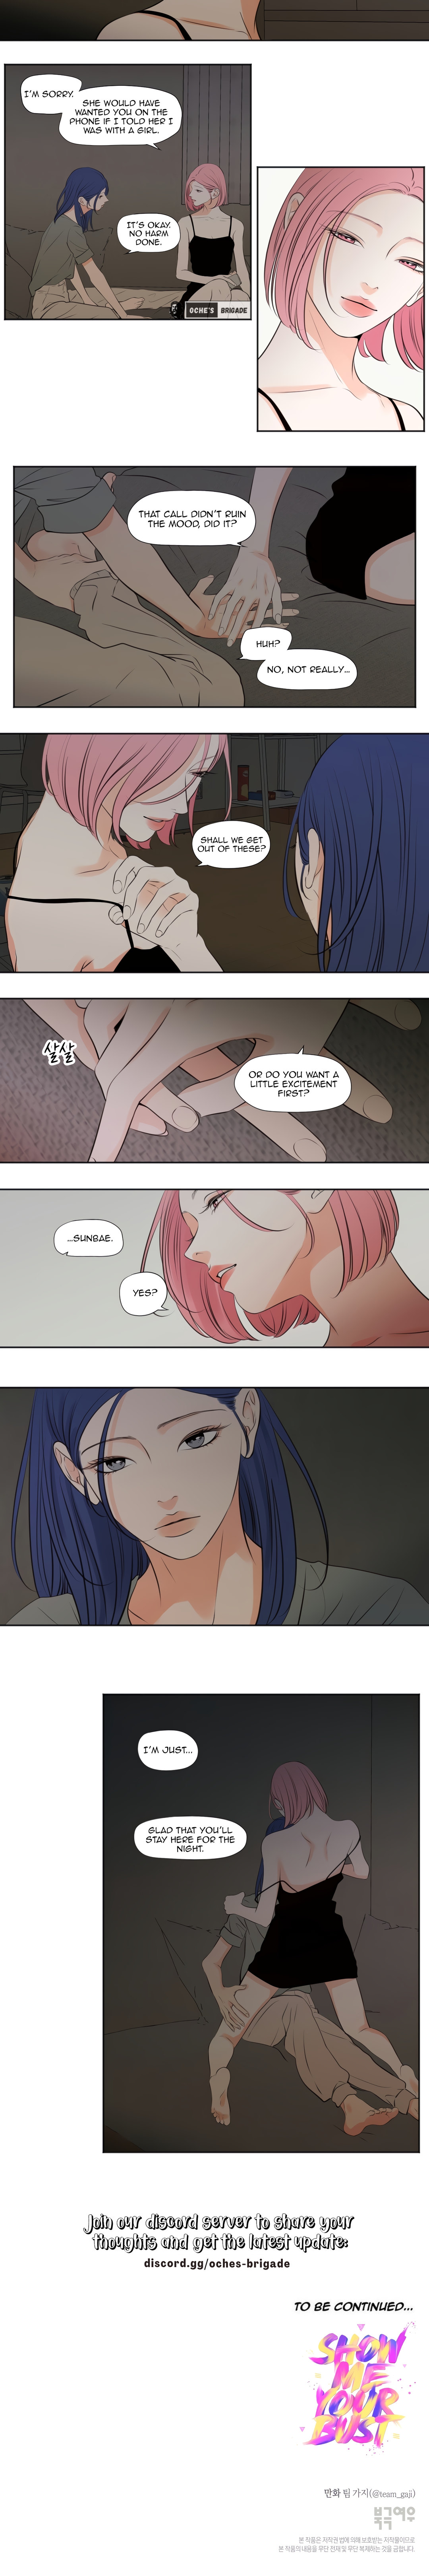 Show Me Your Bust - Chapter 31 Page 6